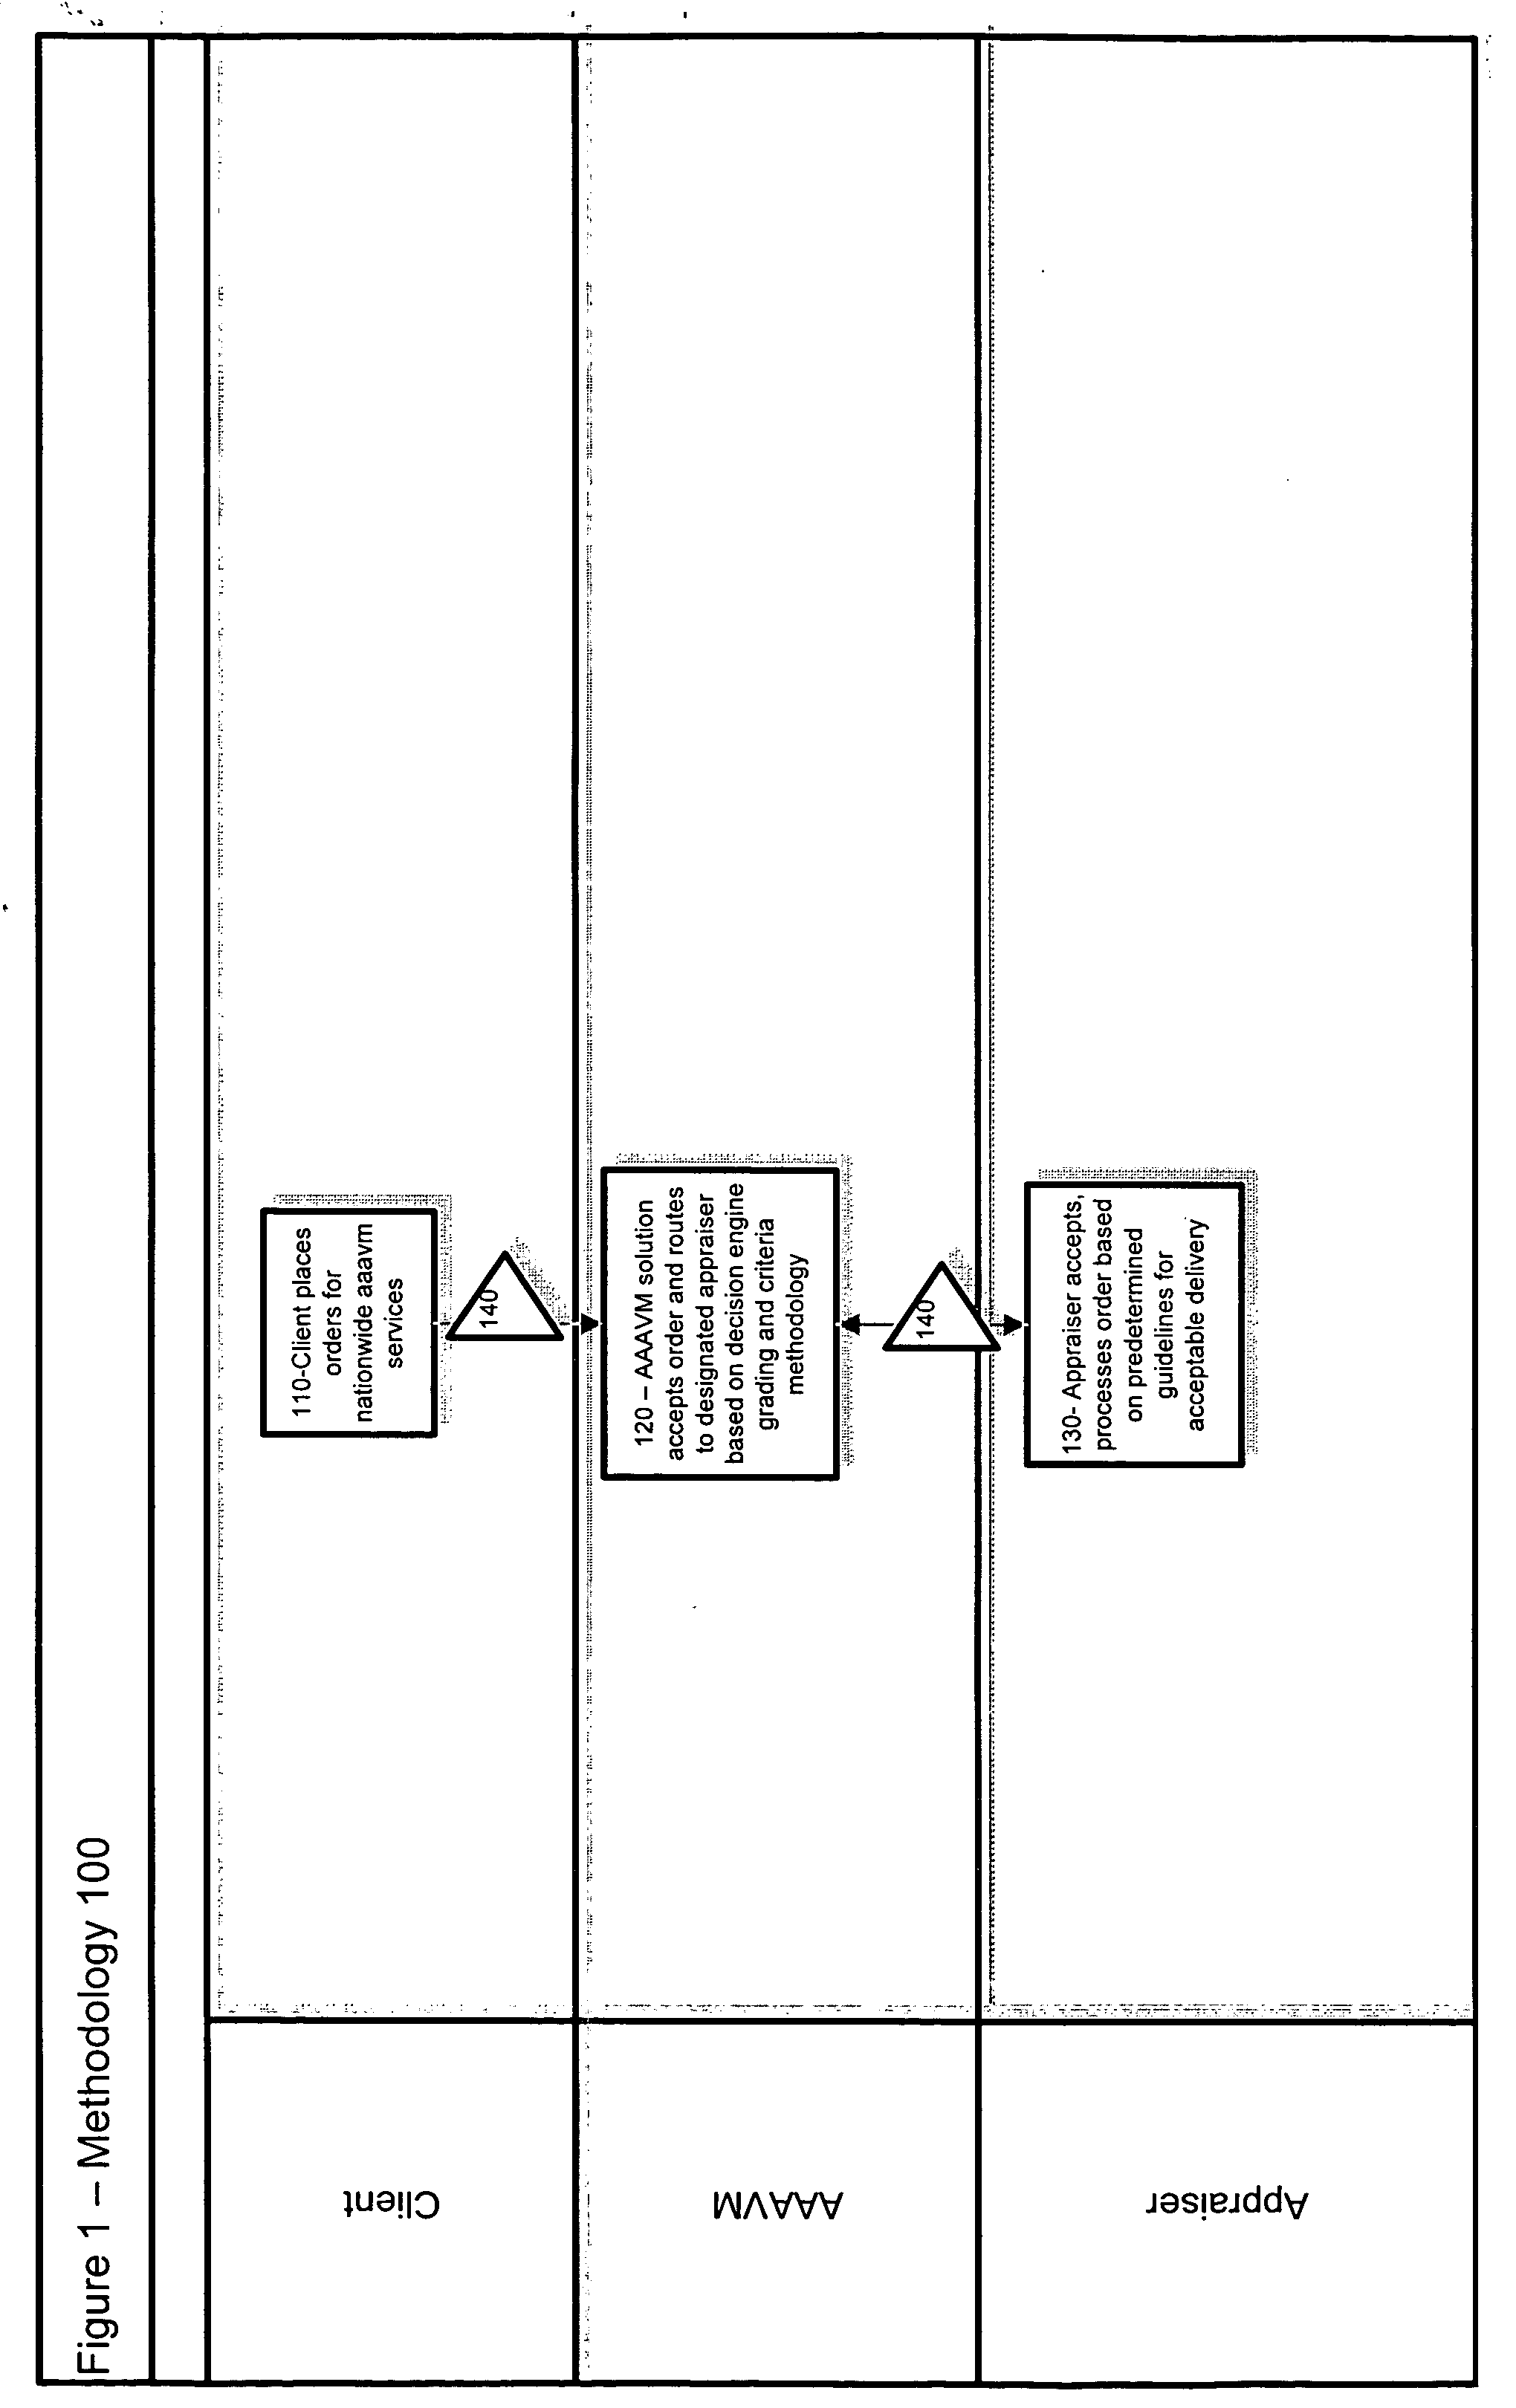 System and method for appraiser-assisted valuation